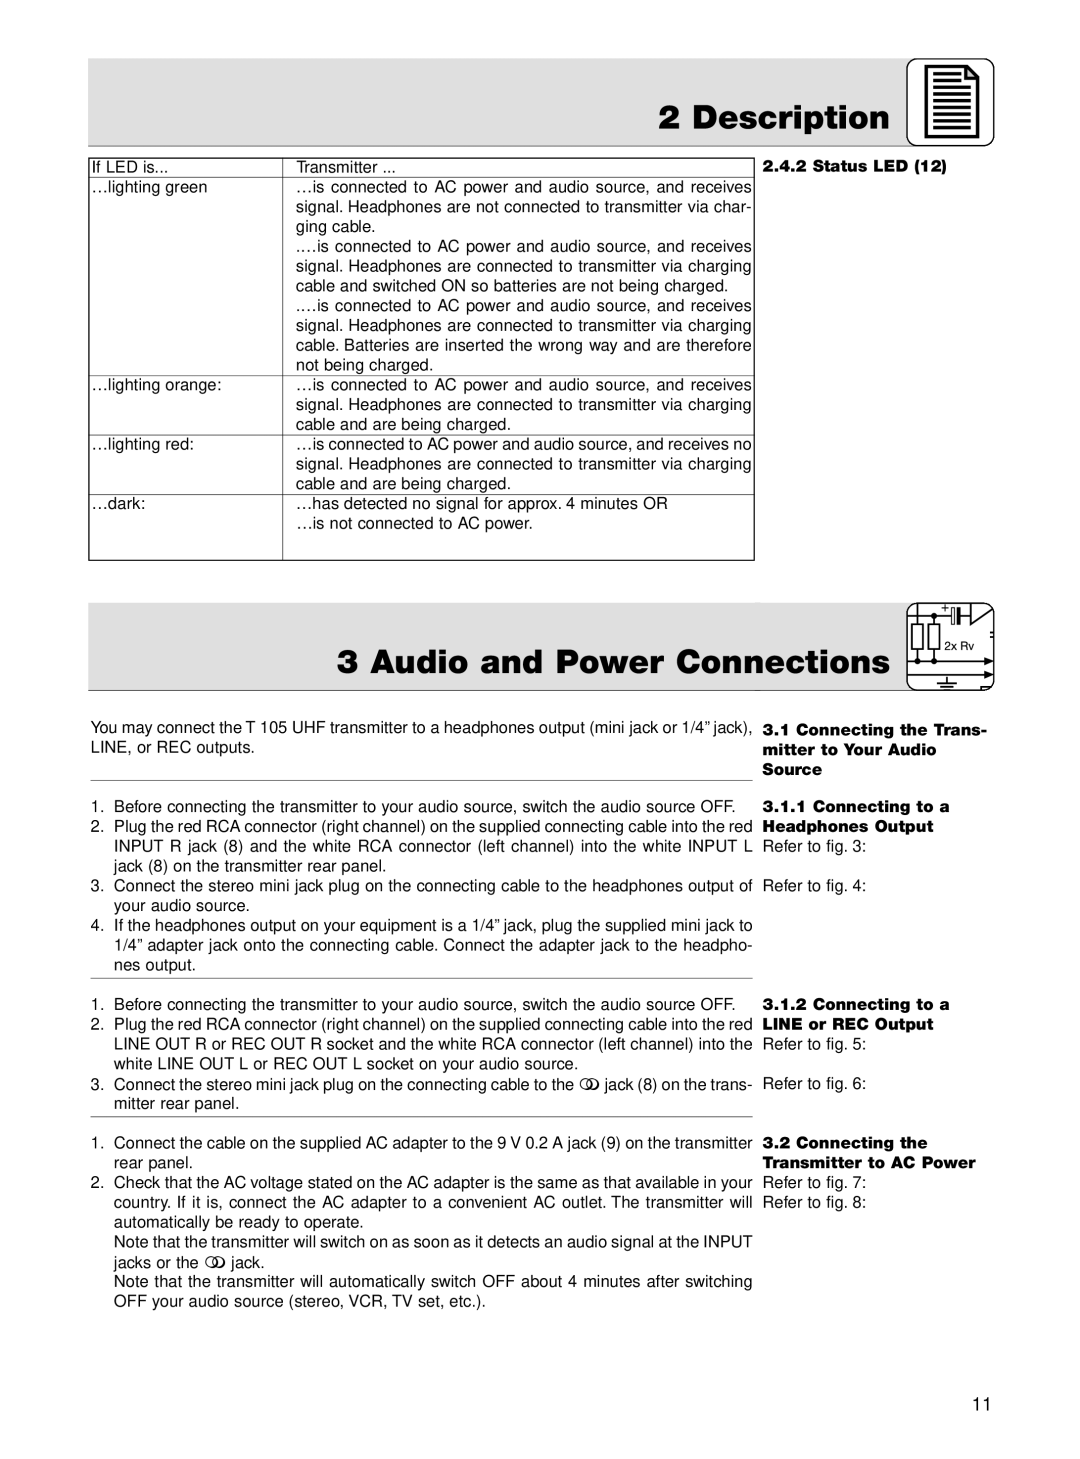 AKG Acoustics K 105 UHF manual Audio and Power Connections, Description, Status LED, 3.1.1Connecting to a Headphones Output 